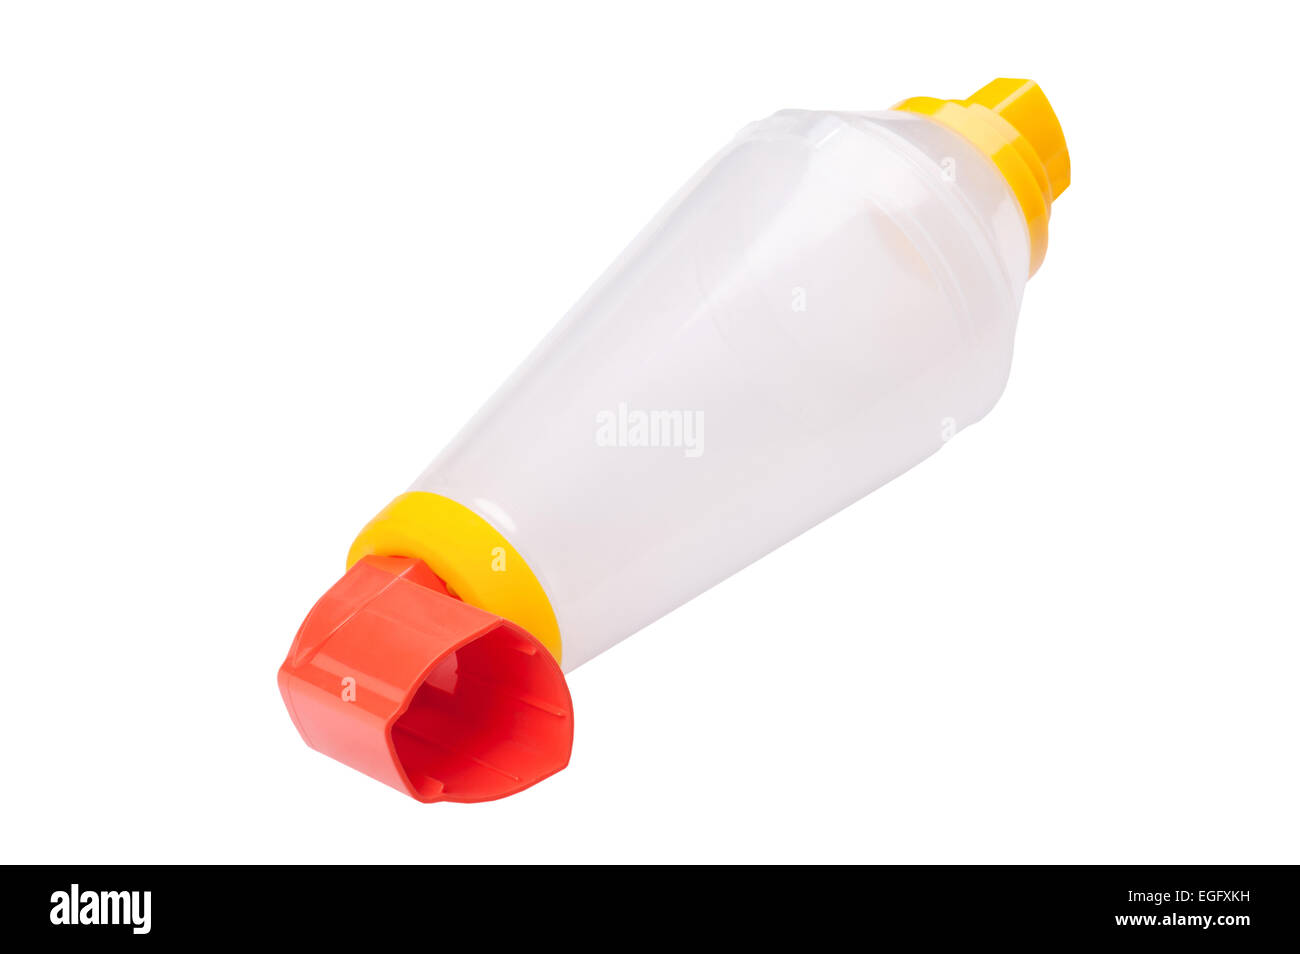 isolated object on white -  Asthma inhaler Stock Photo